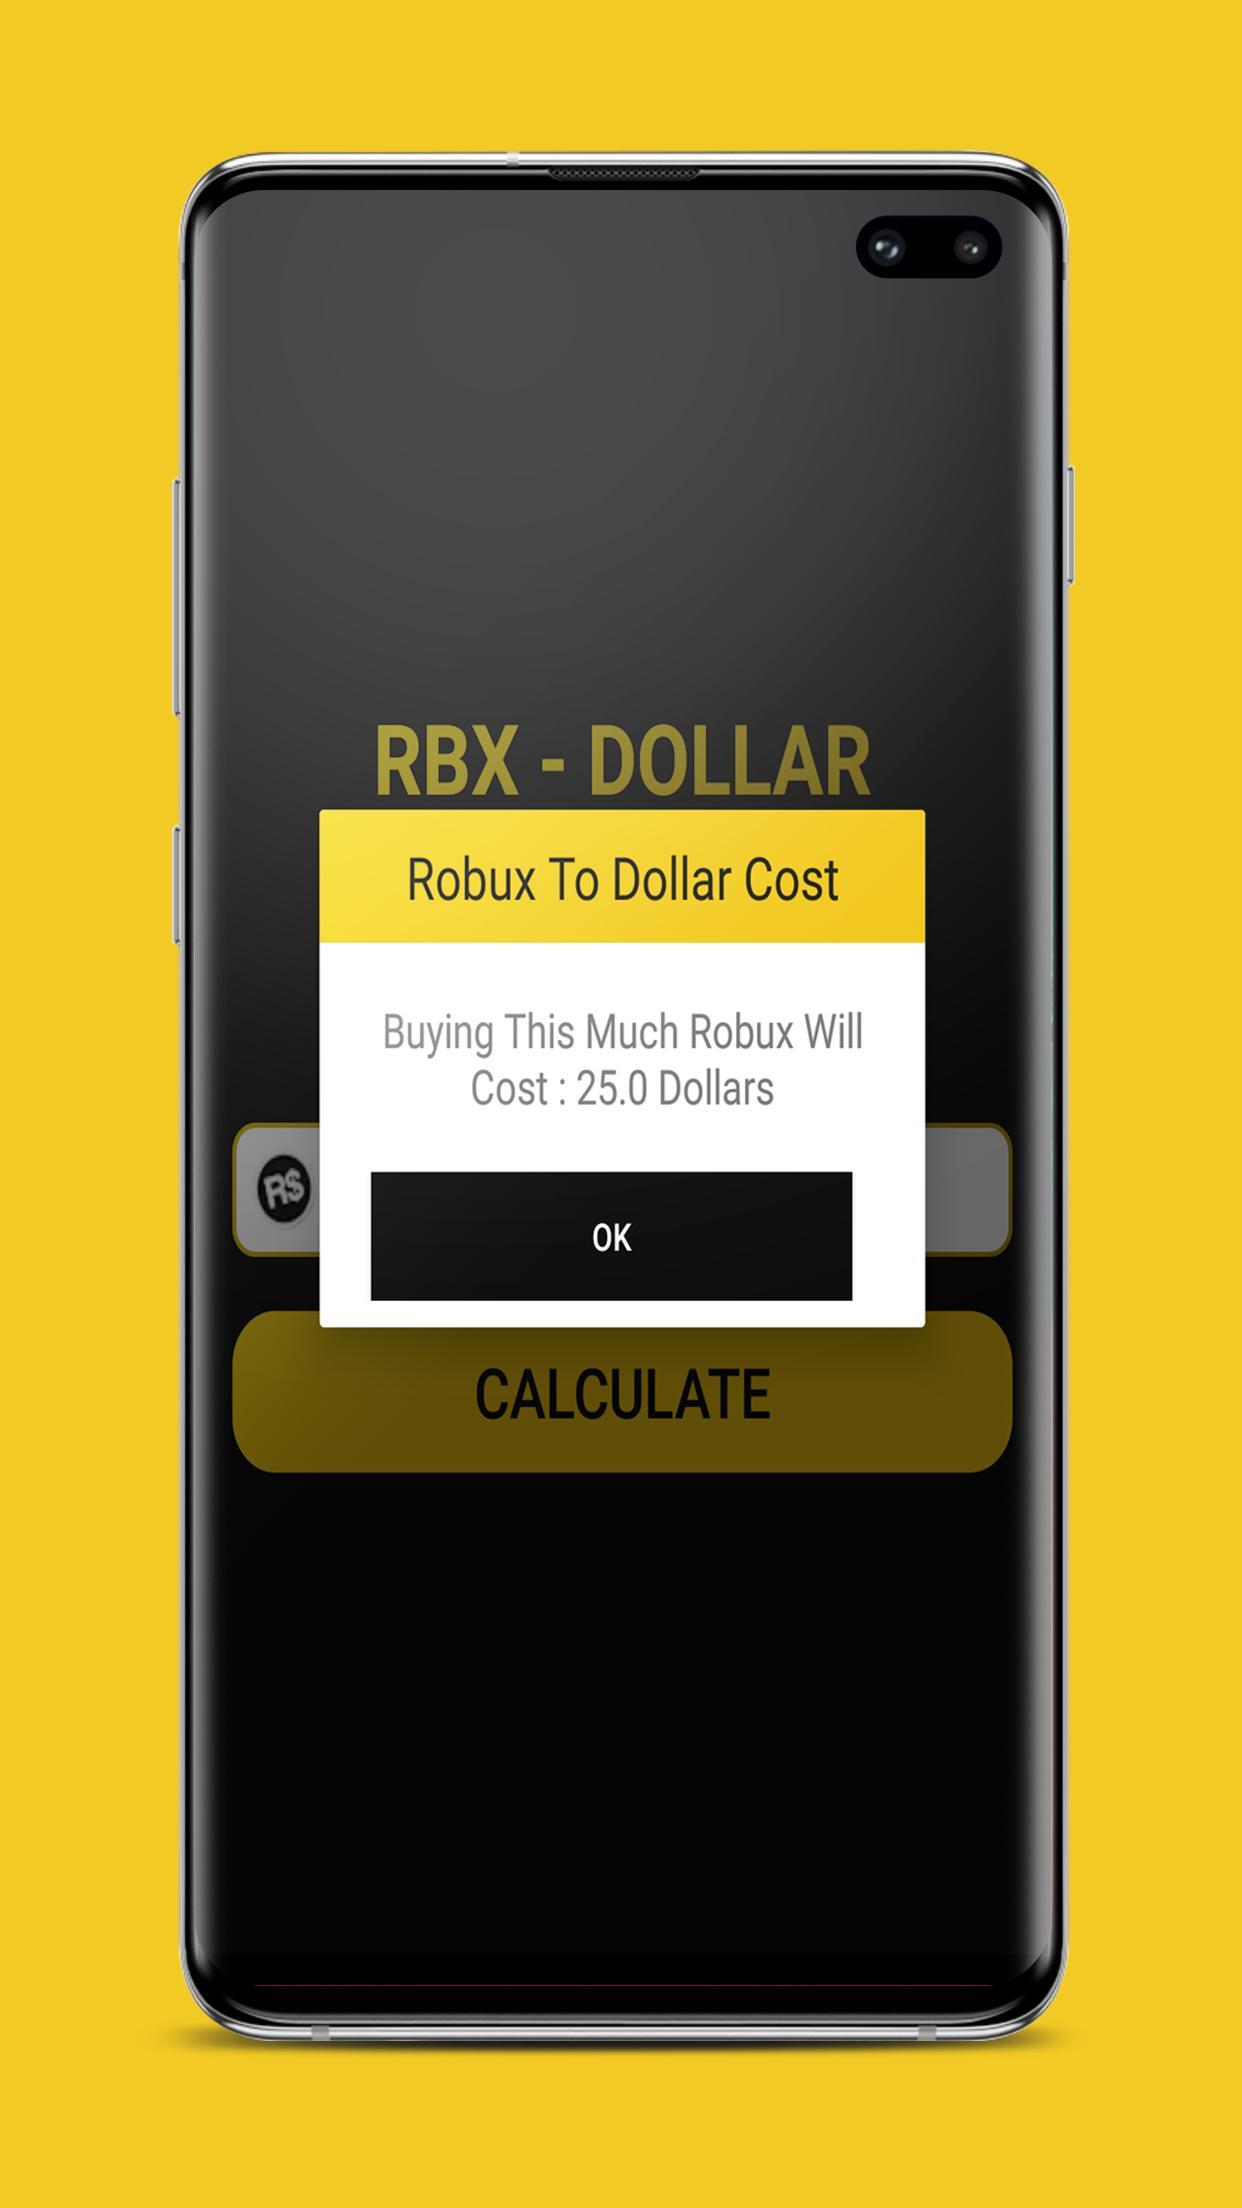 Buying Robux From Rbx Place Roblox Unblocked Roblox Free Robux Codes 2019 August Calendar - does rbx calc work